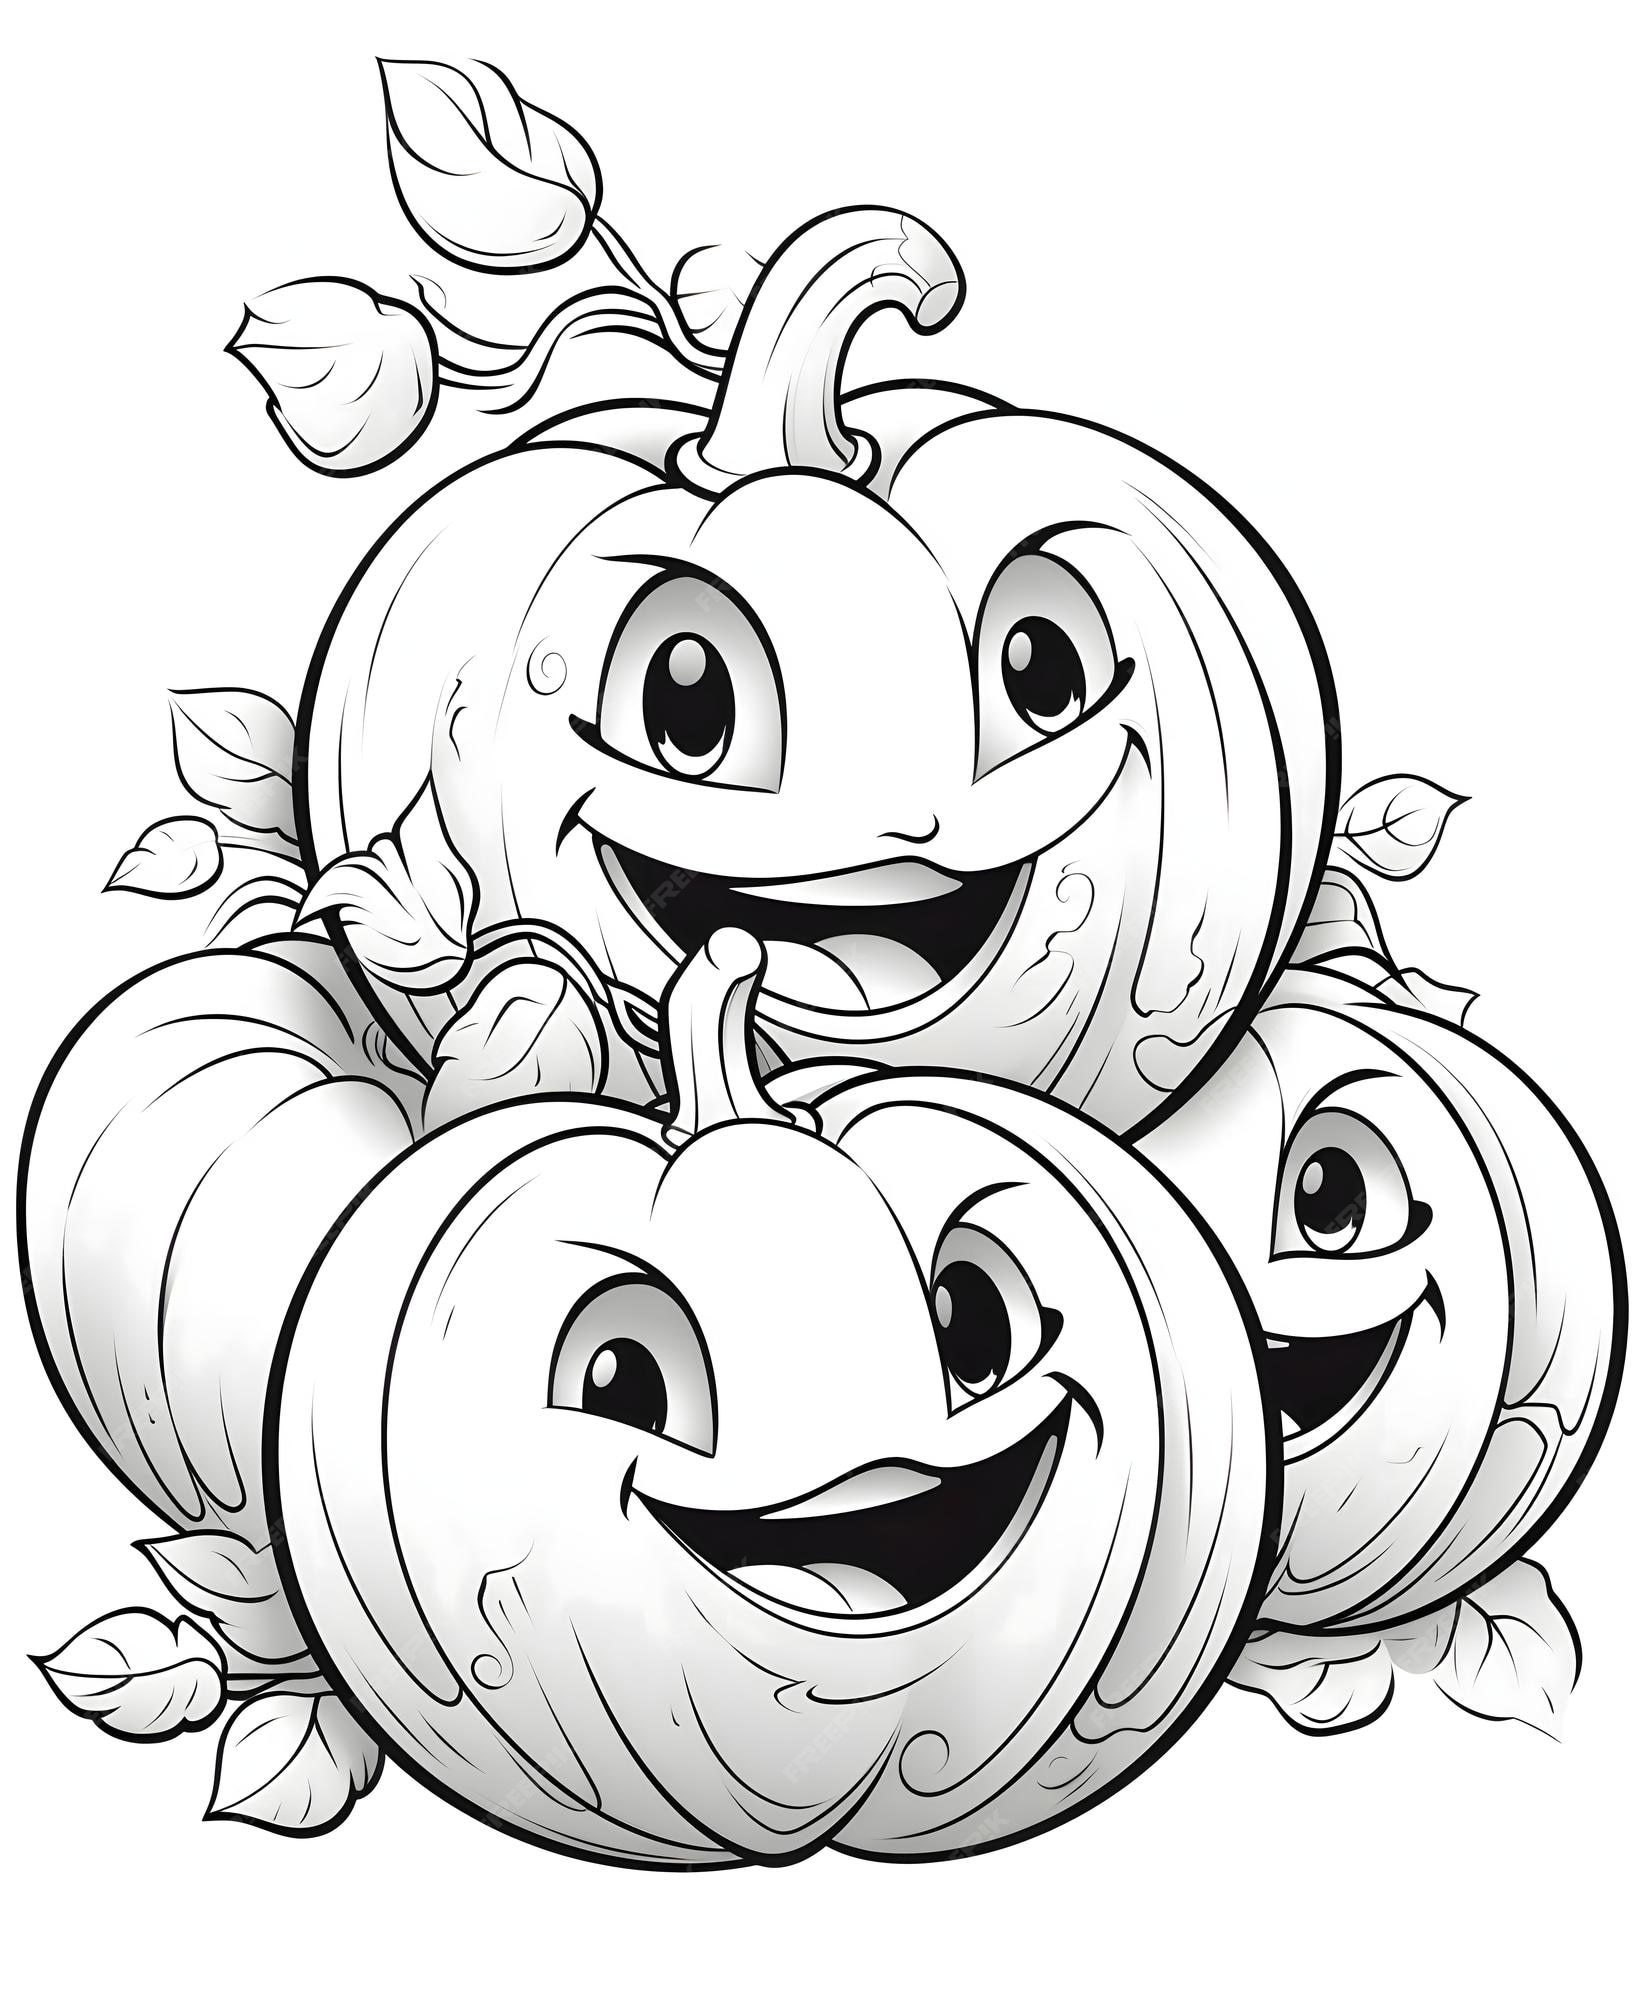 Premium vector four jackolantern pumpkins with eyes mouth and tongue halloween black and white picture coloring book